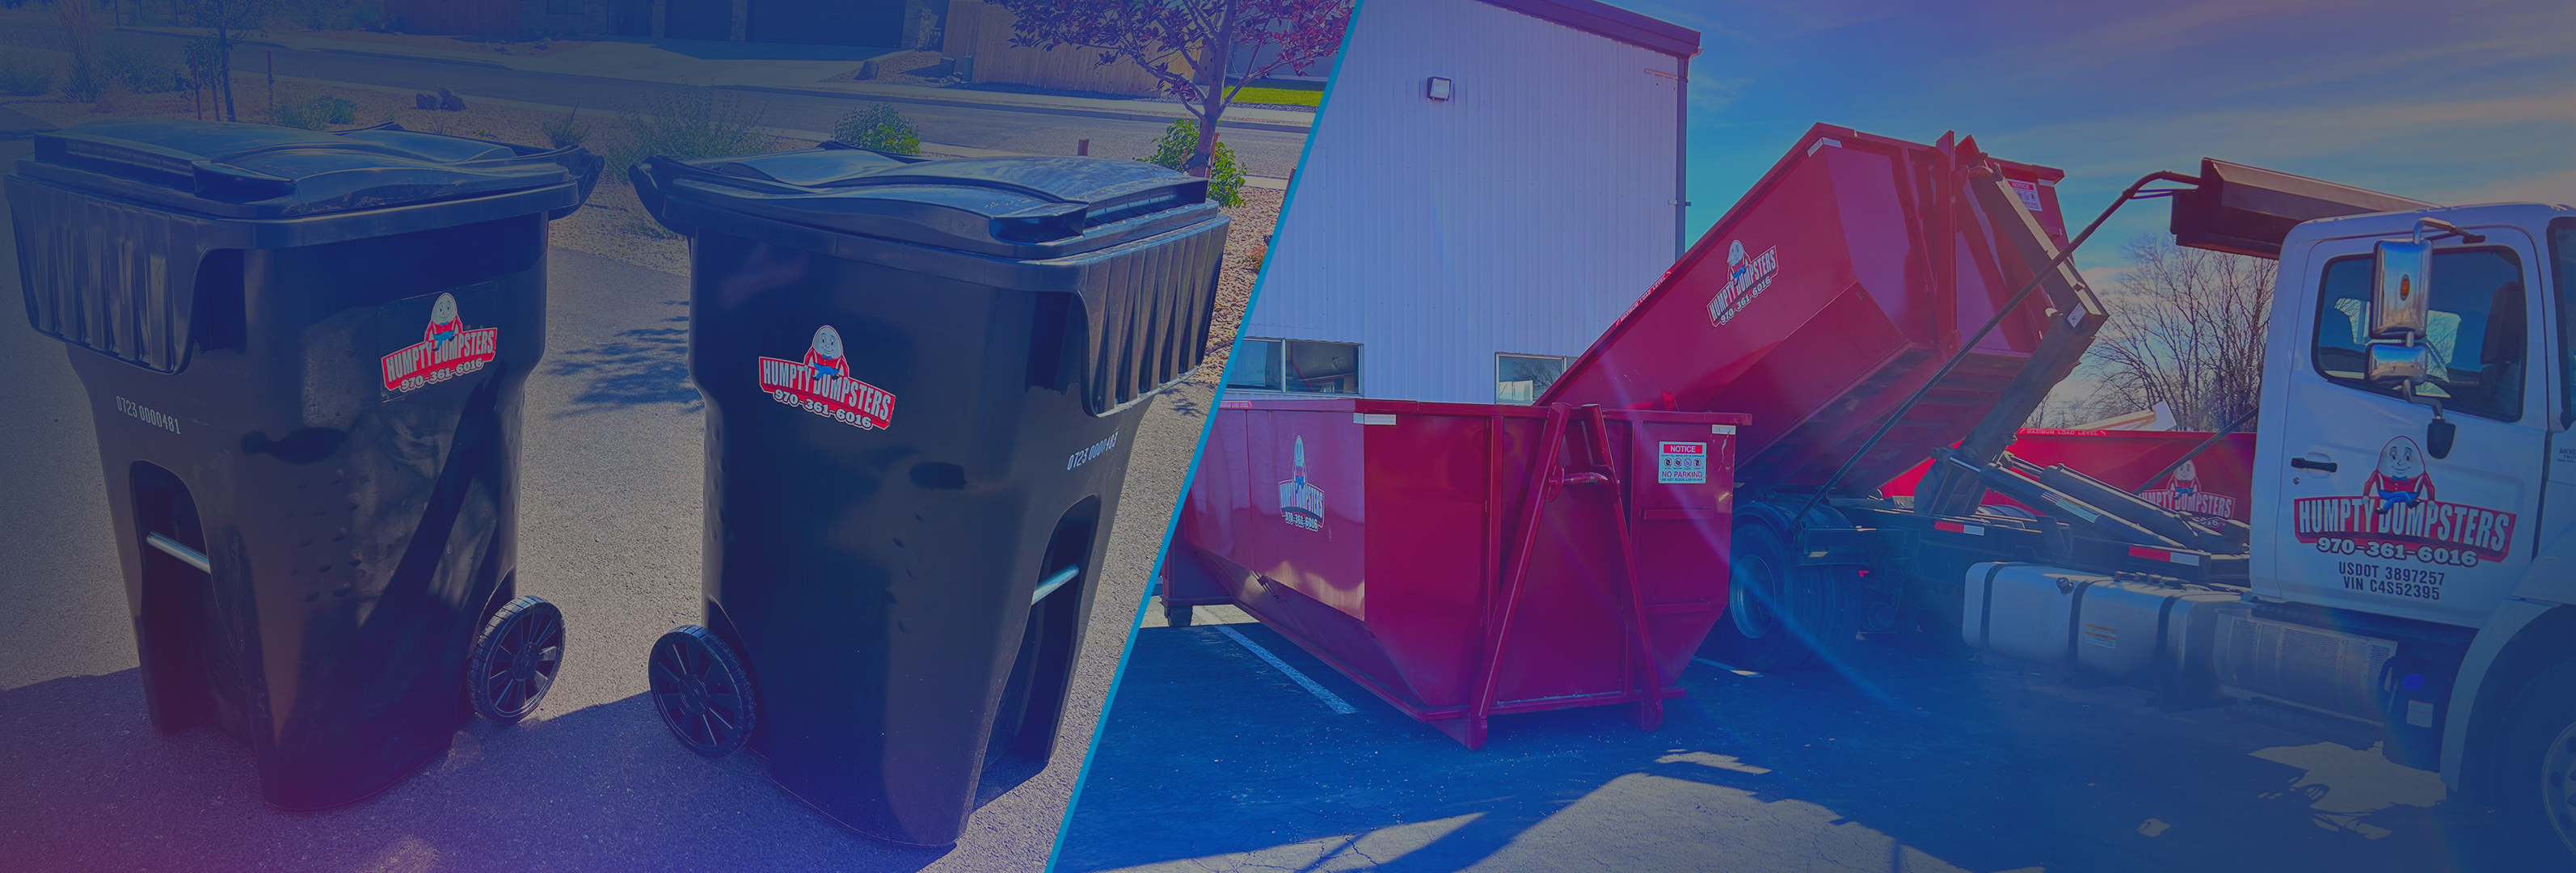 Images of residential garbage cans and commercial roll off dumpsters